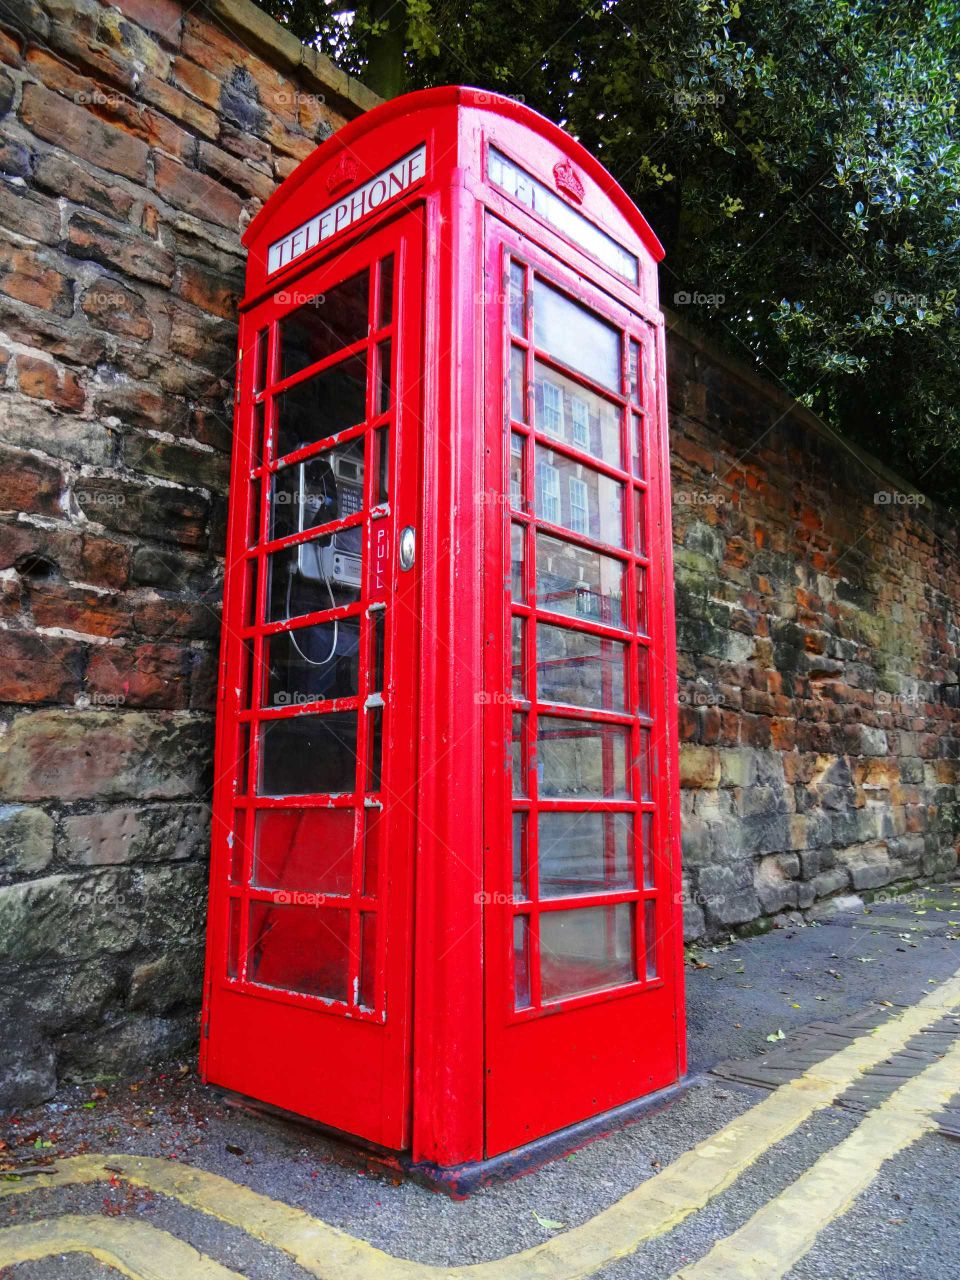 The British red phone booth on old wall